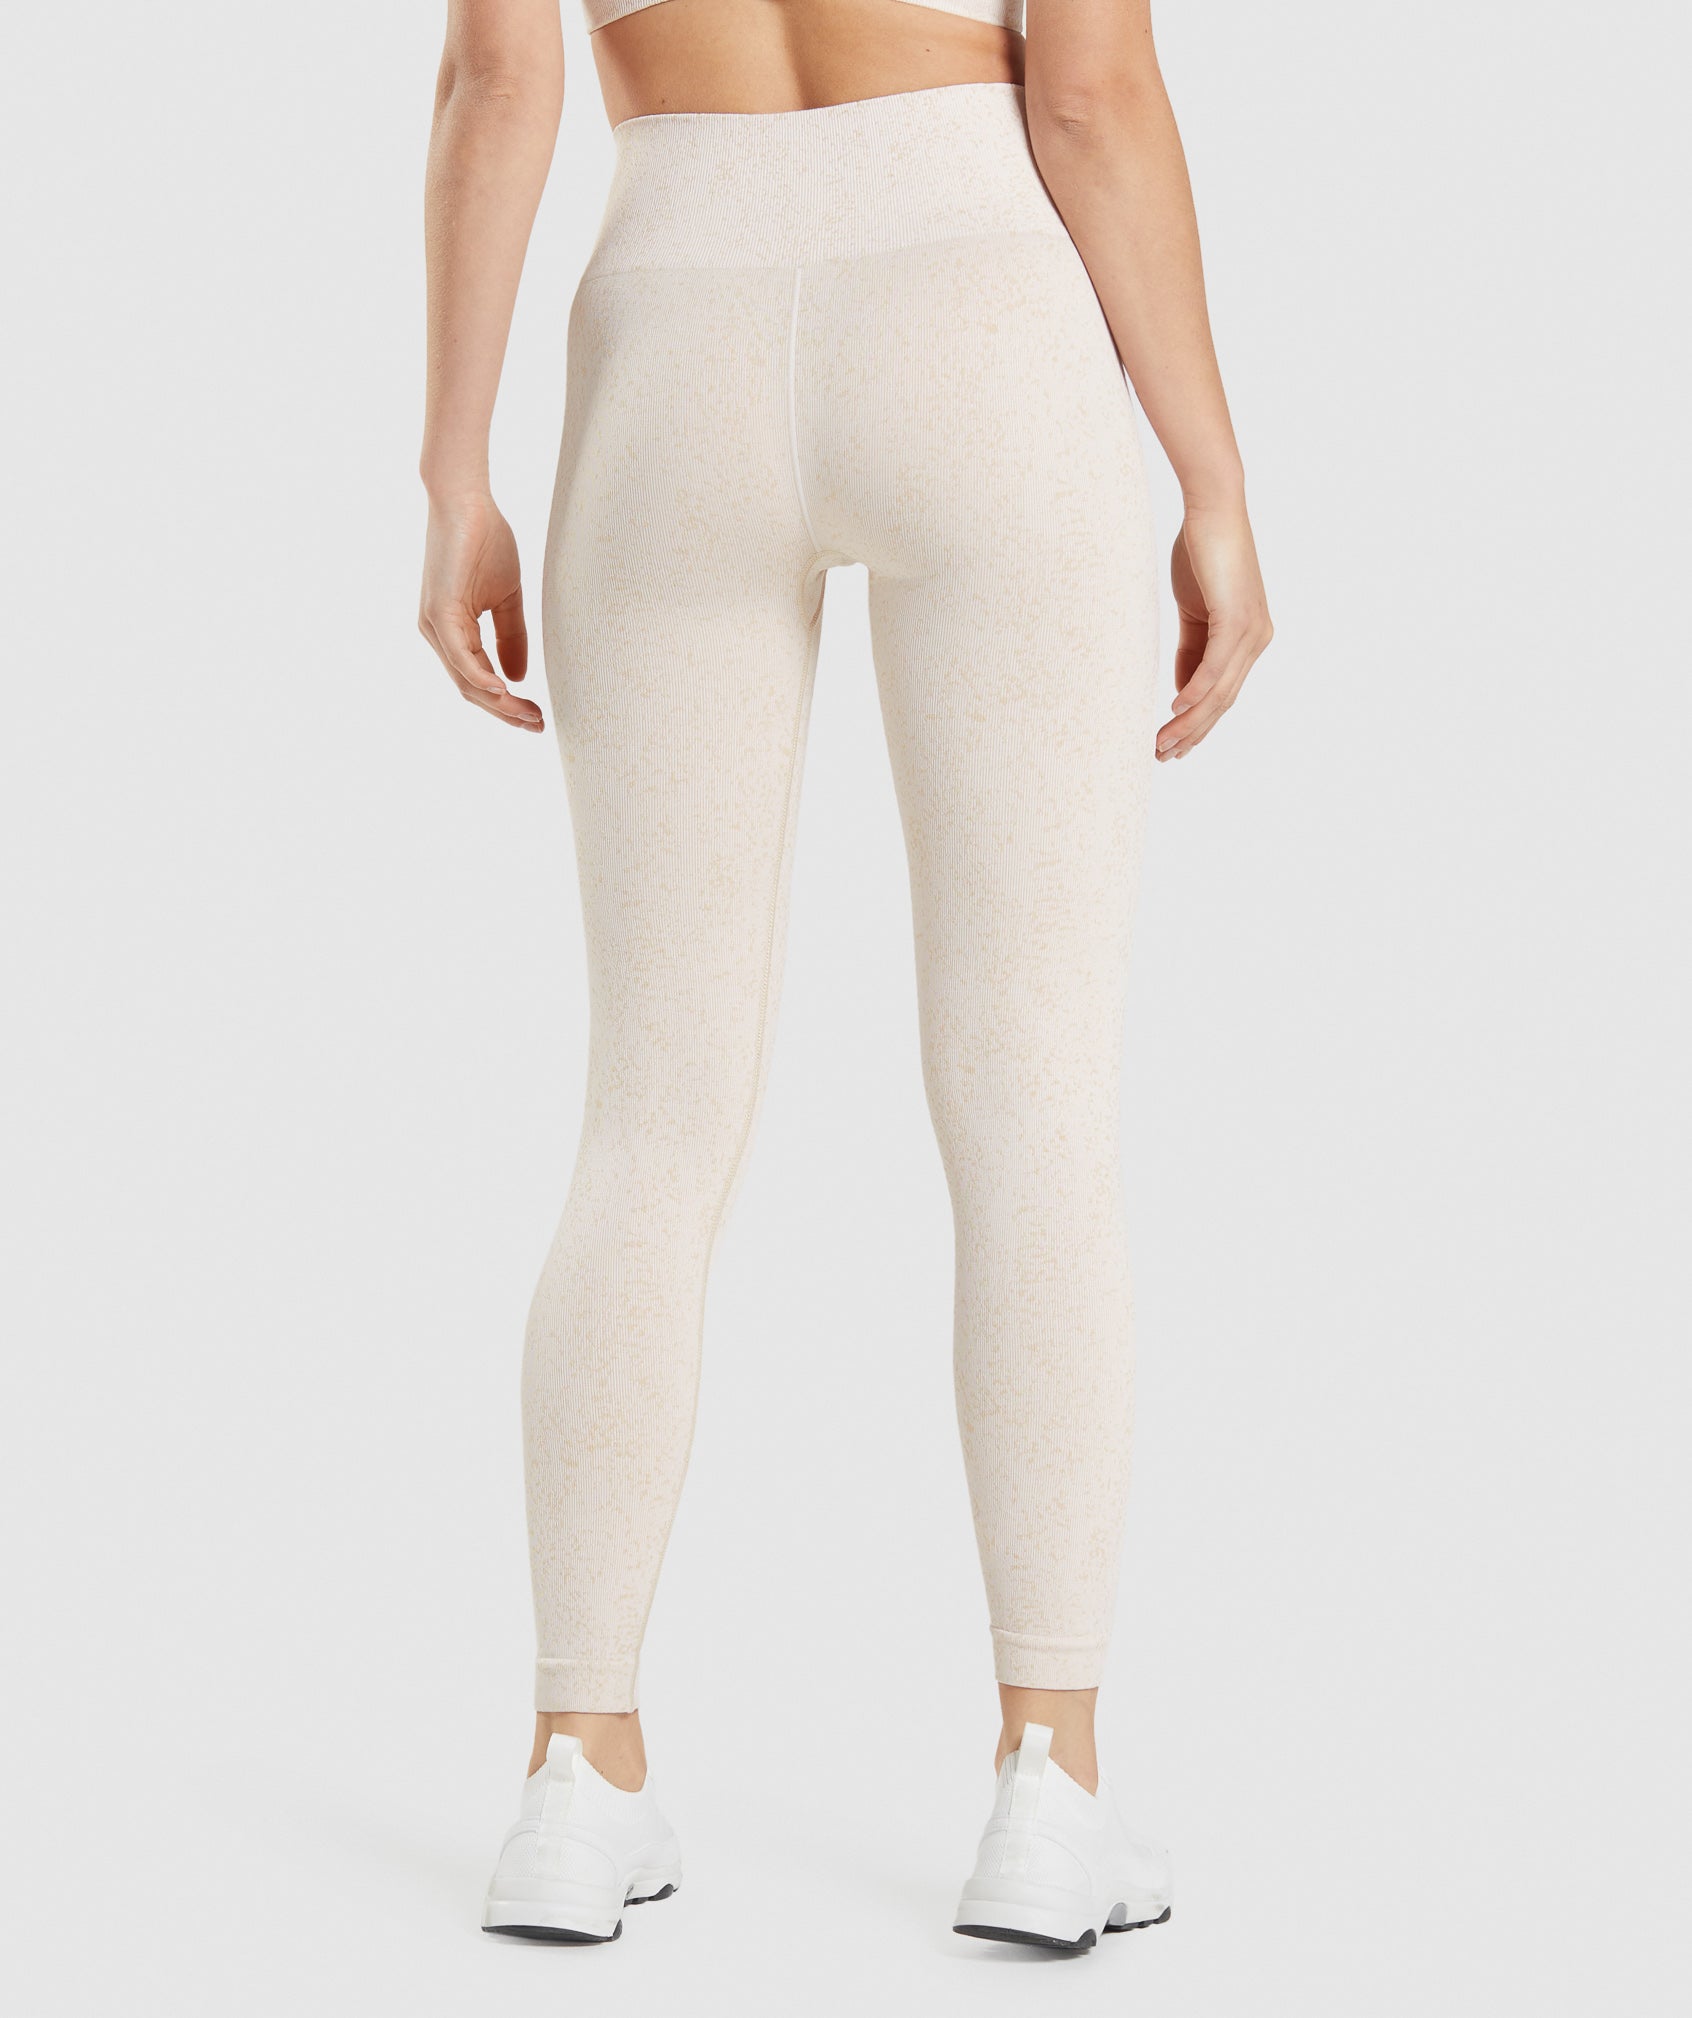 Adapt Fleck Seamless Leggings in Mineral | Coconut White - view 2